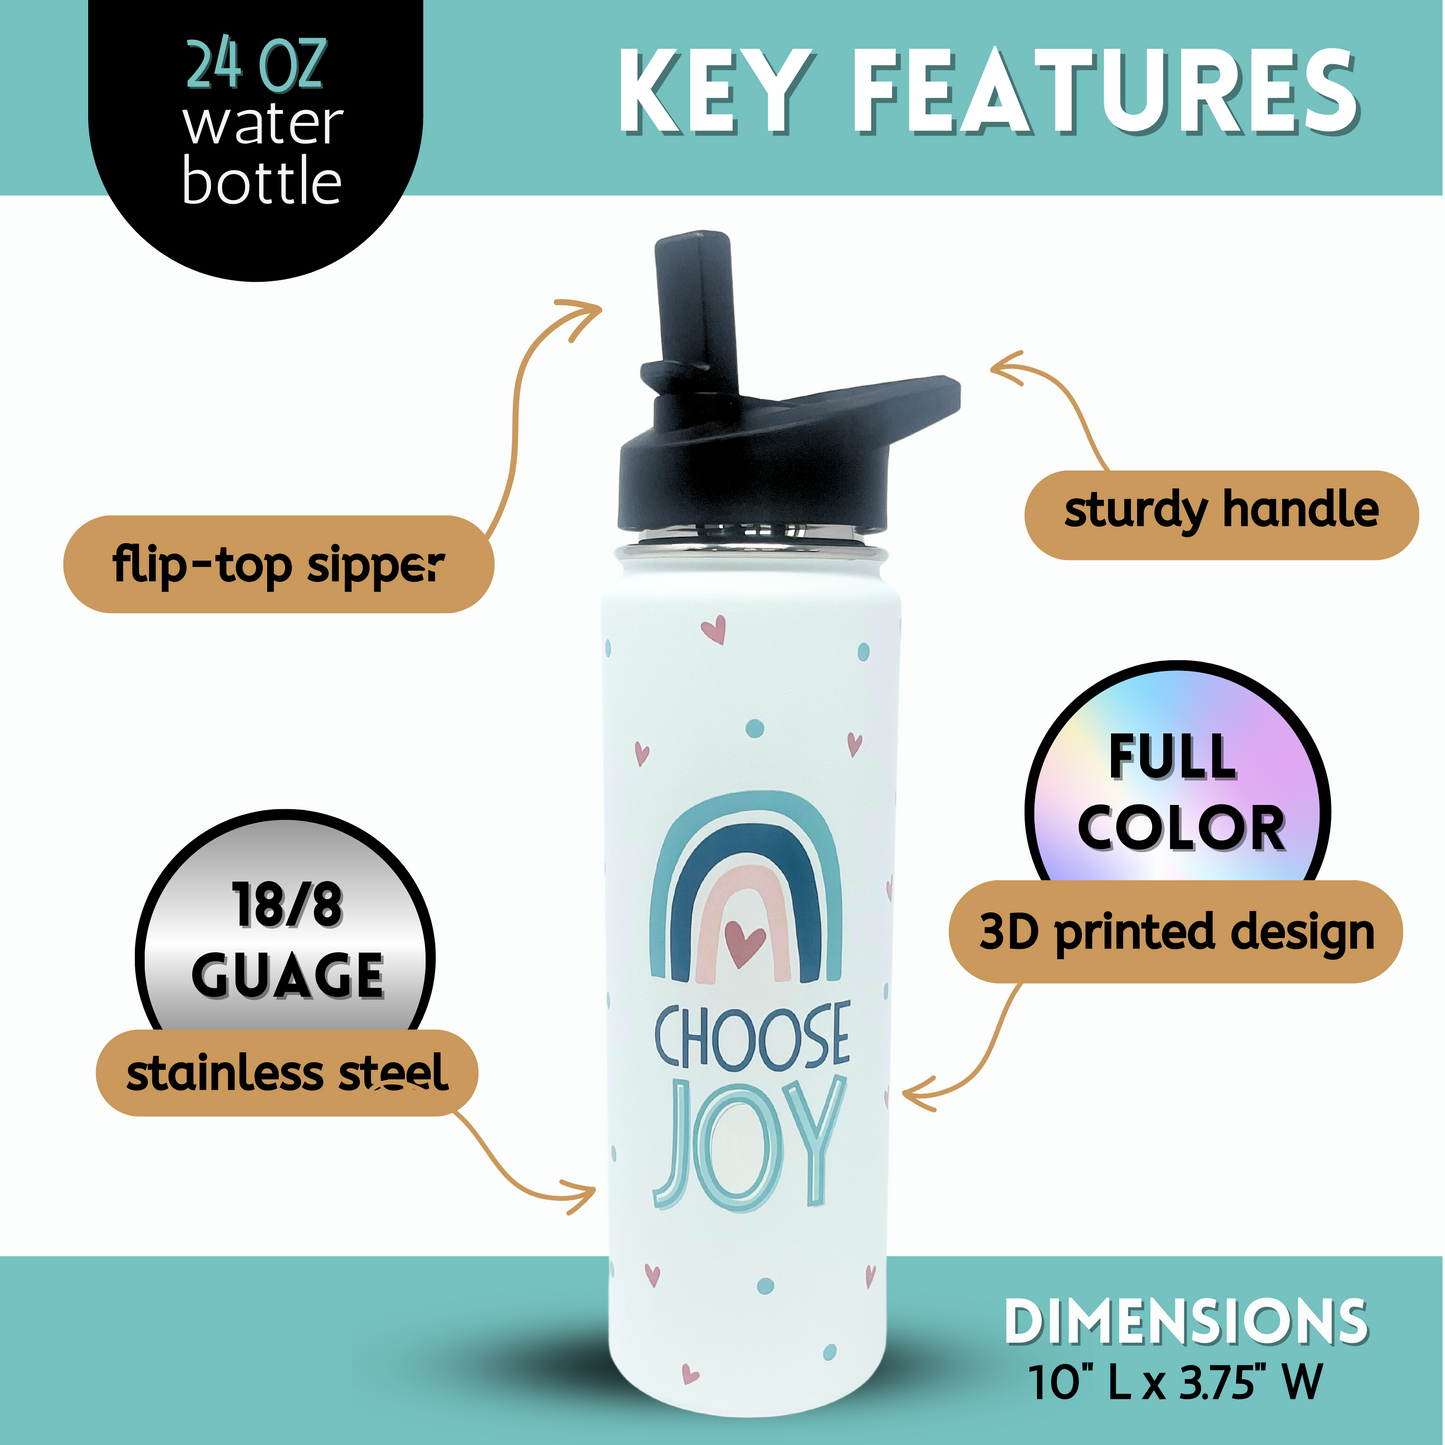 Inspirational Gifts Tumblers - Cute Unique Gifts for Women - Insulated Cup, Water Bottle - Great Gifts for Mother’s Day, Birthday, Best Cups and Mugs for Great Gift for Mom, Wife